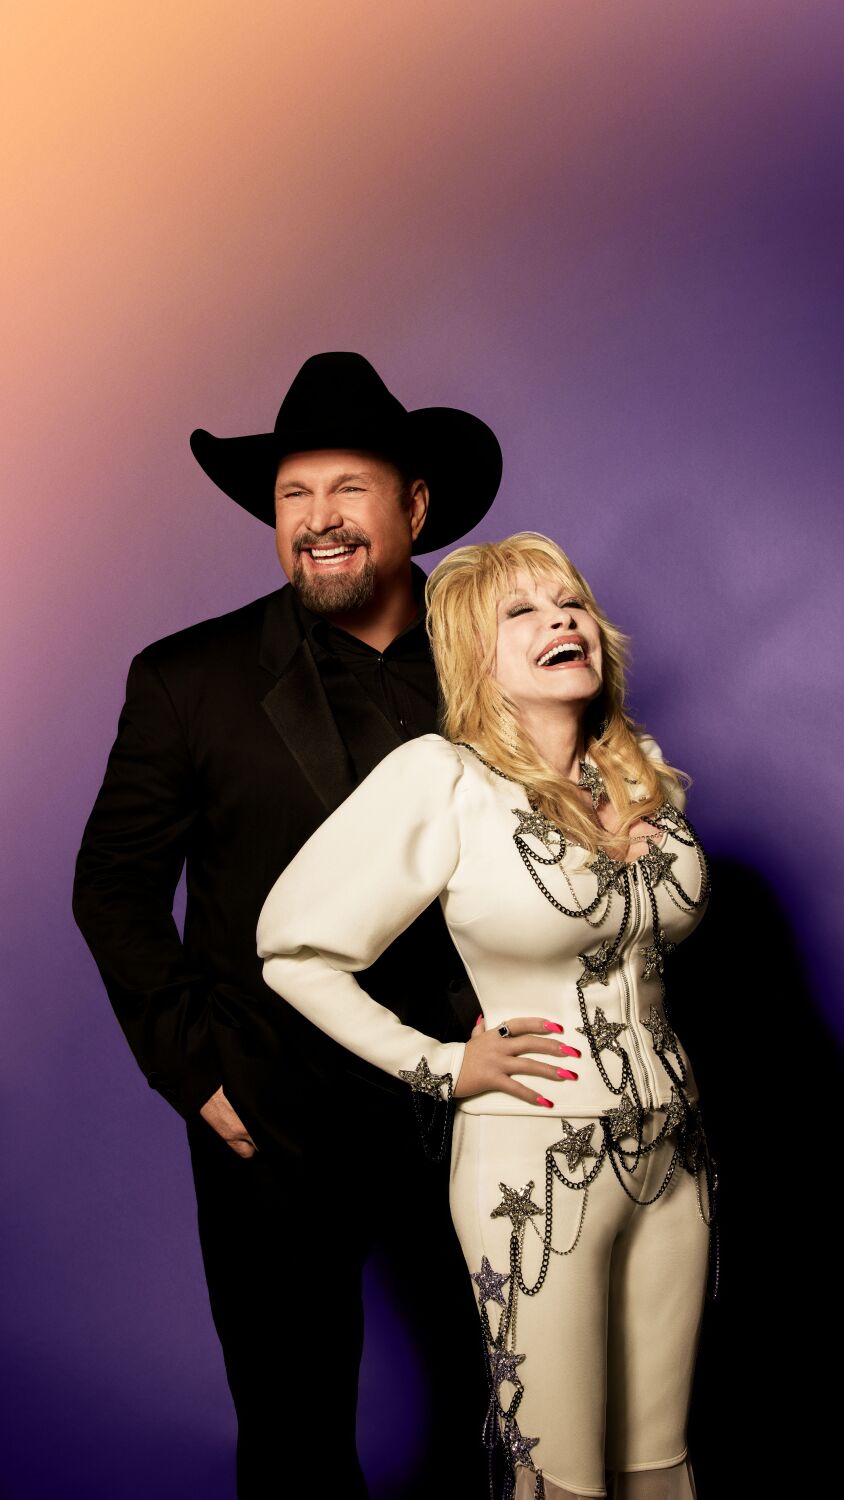 Garth Brooks and Dolly Parton team up for the first time to host ACM Awards